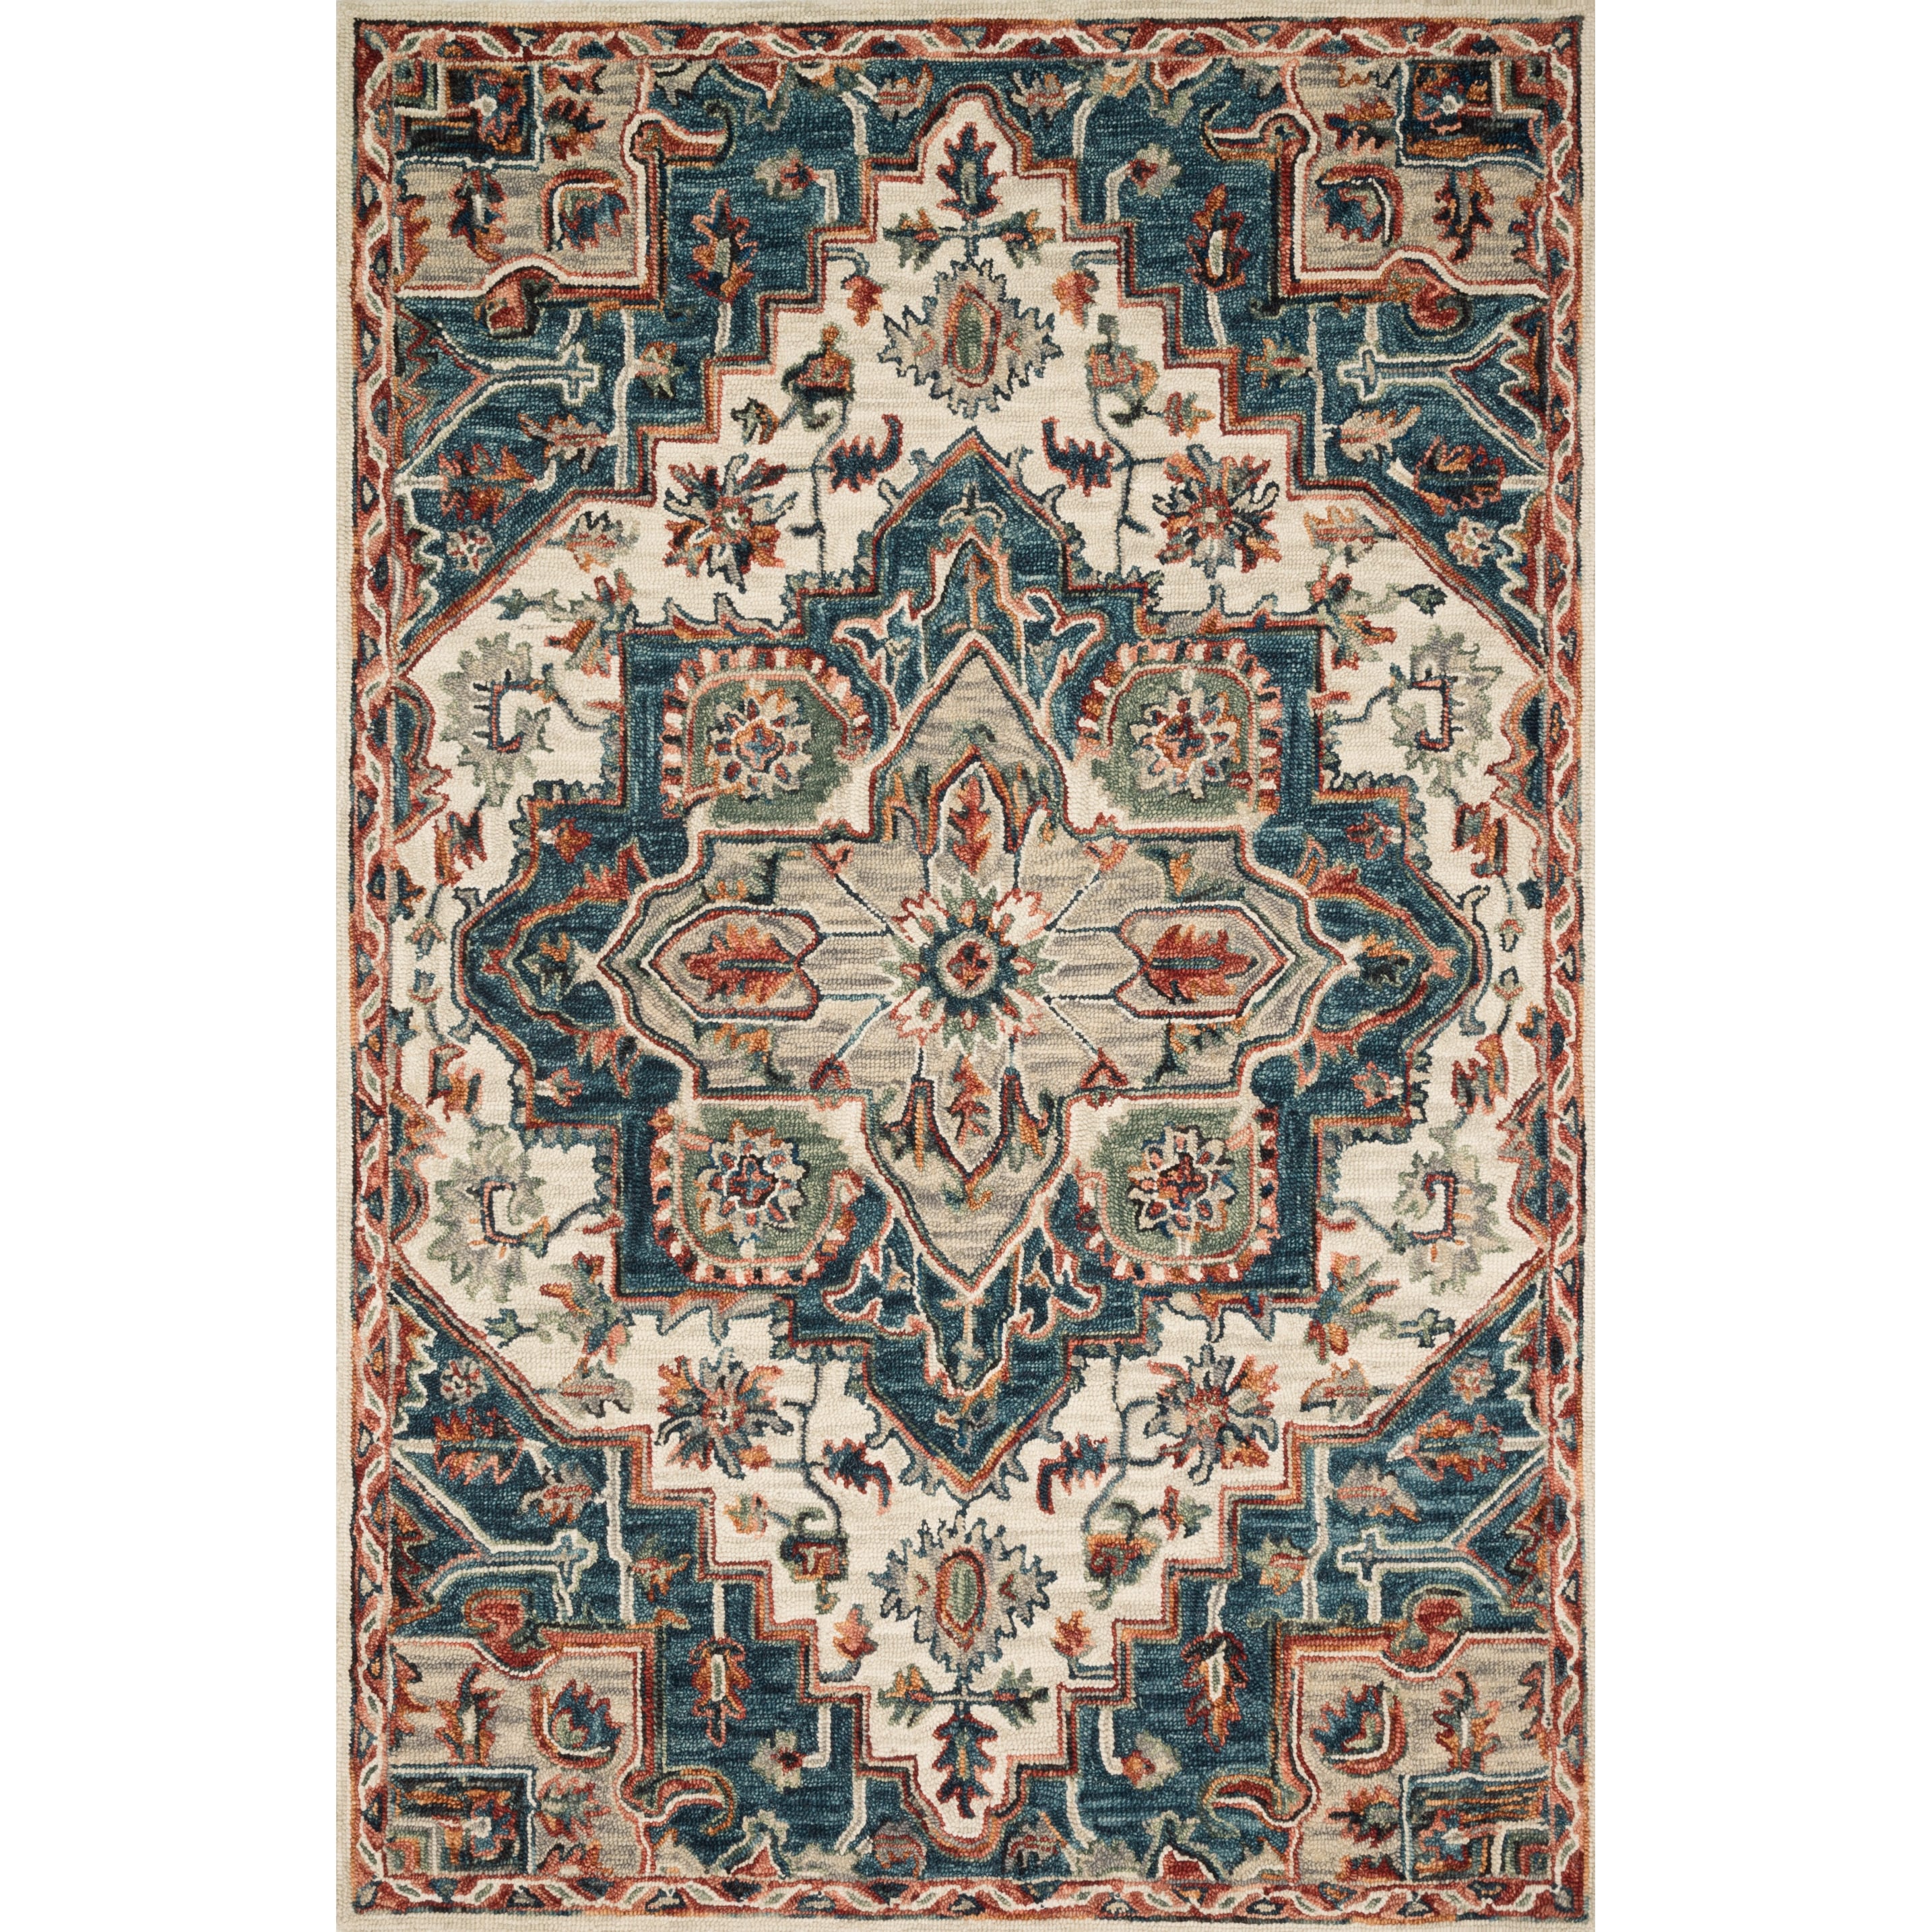 https://ak1.ostkcdn.com/images/products/is/images/direct/84f8493d163c794266a02fee51bf201b4313a5d6/Alexander-Home-Madeline-Wool-Hand-Hooked-Heritage-Rug.jpg